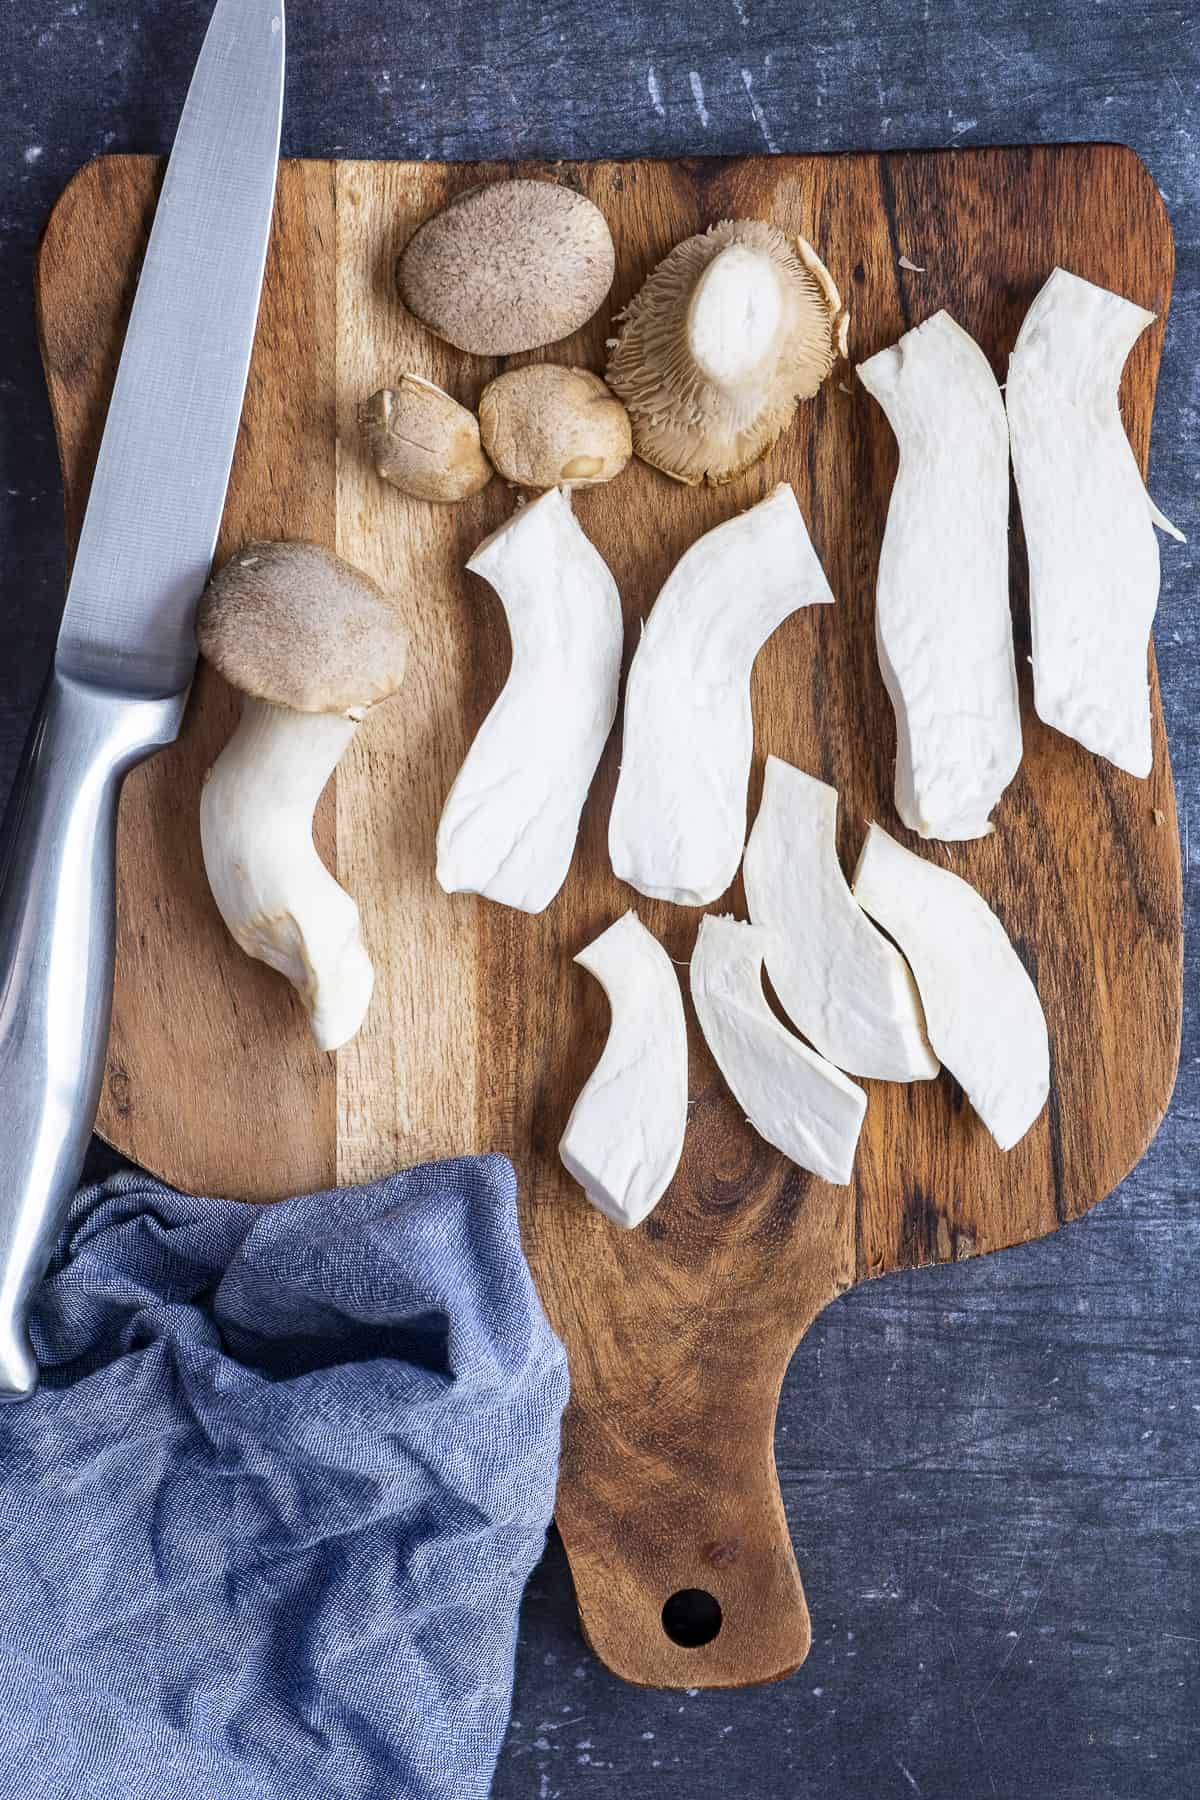 King oyster mushrooms sliced on a wooden board and a knife on it.